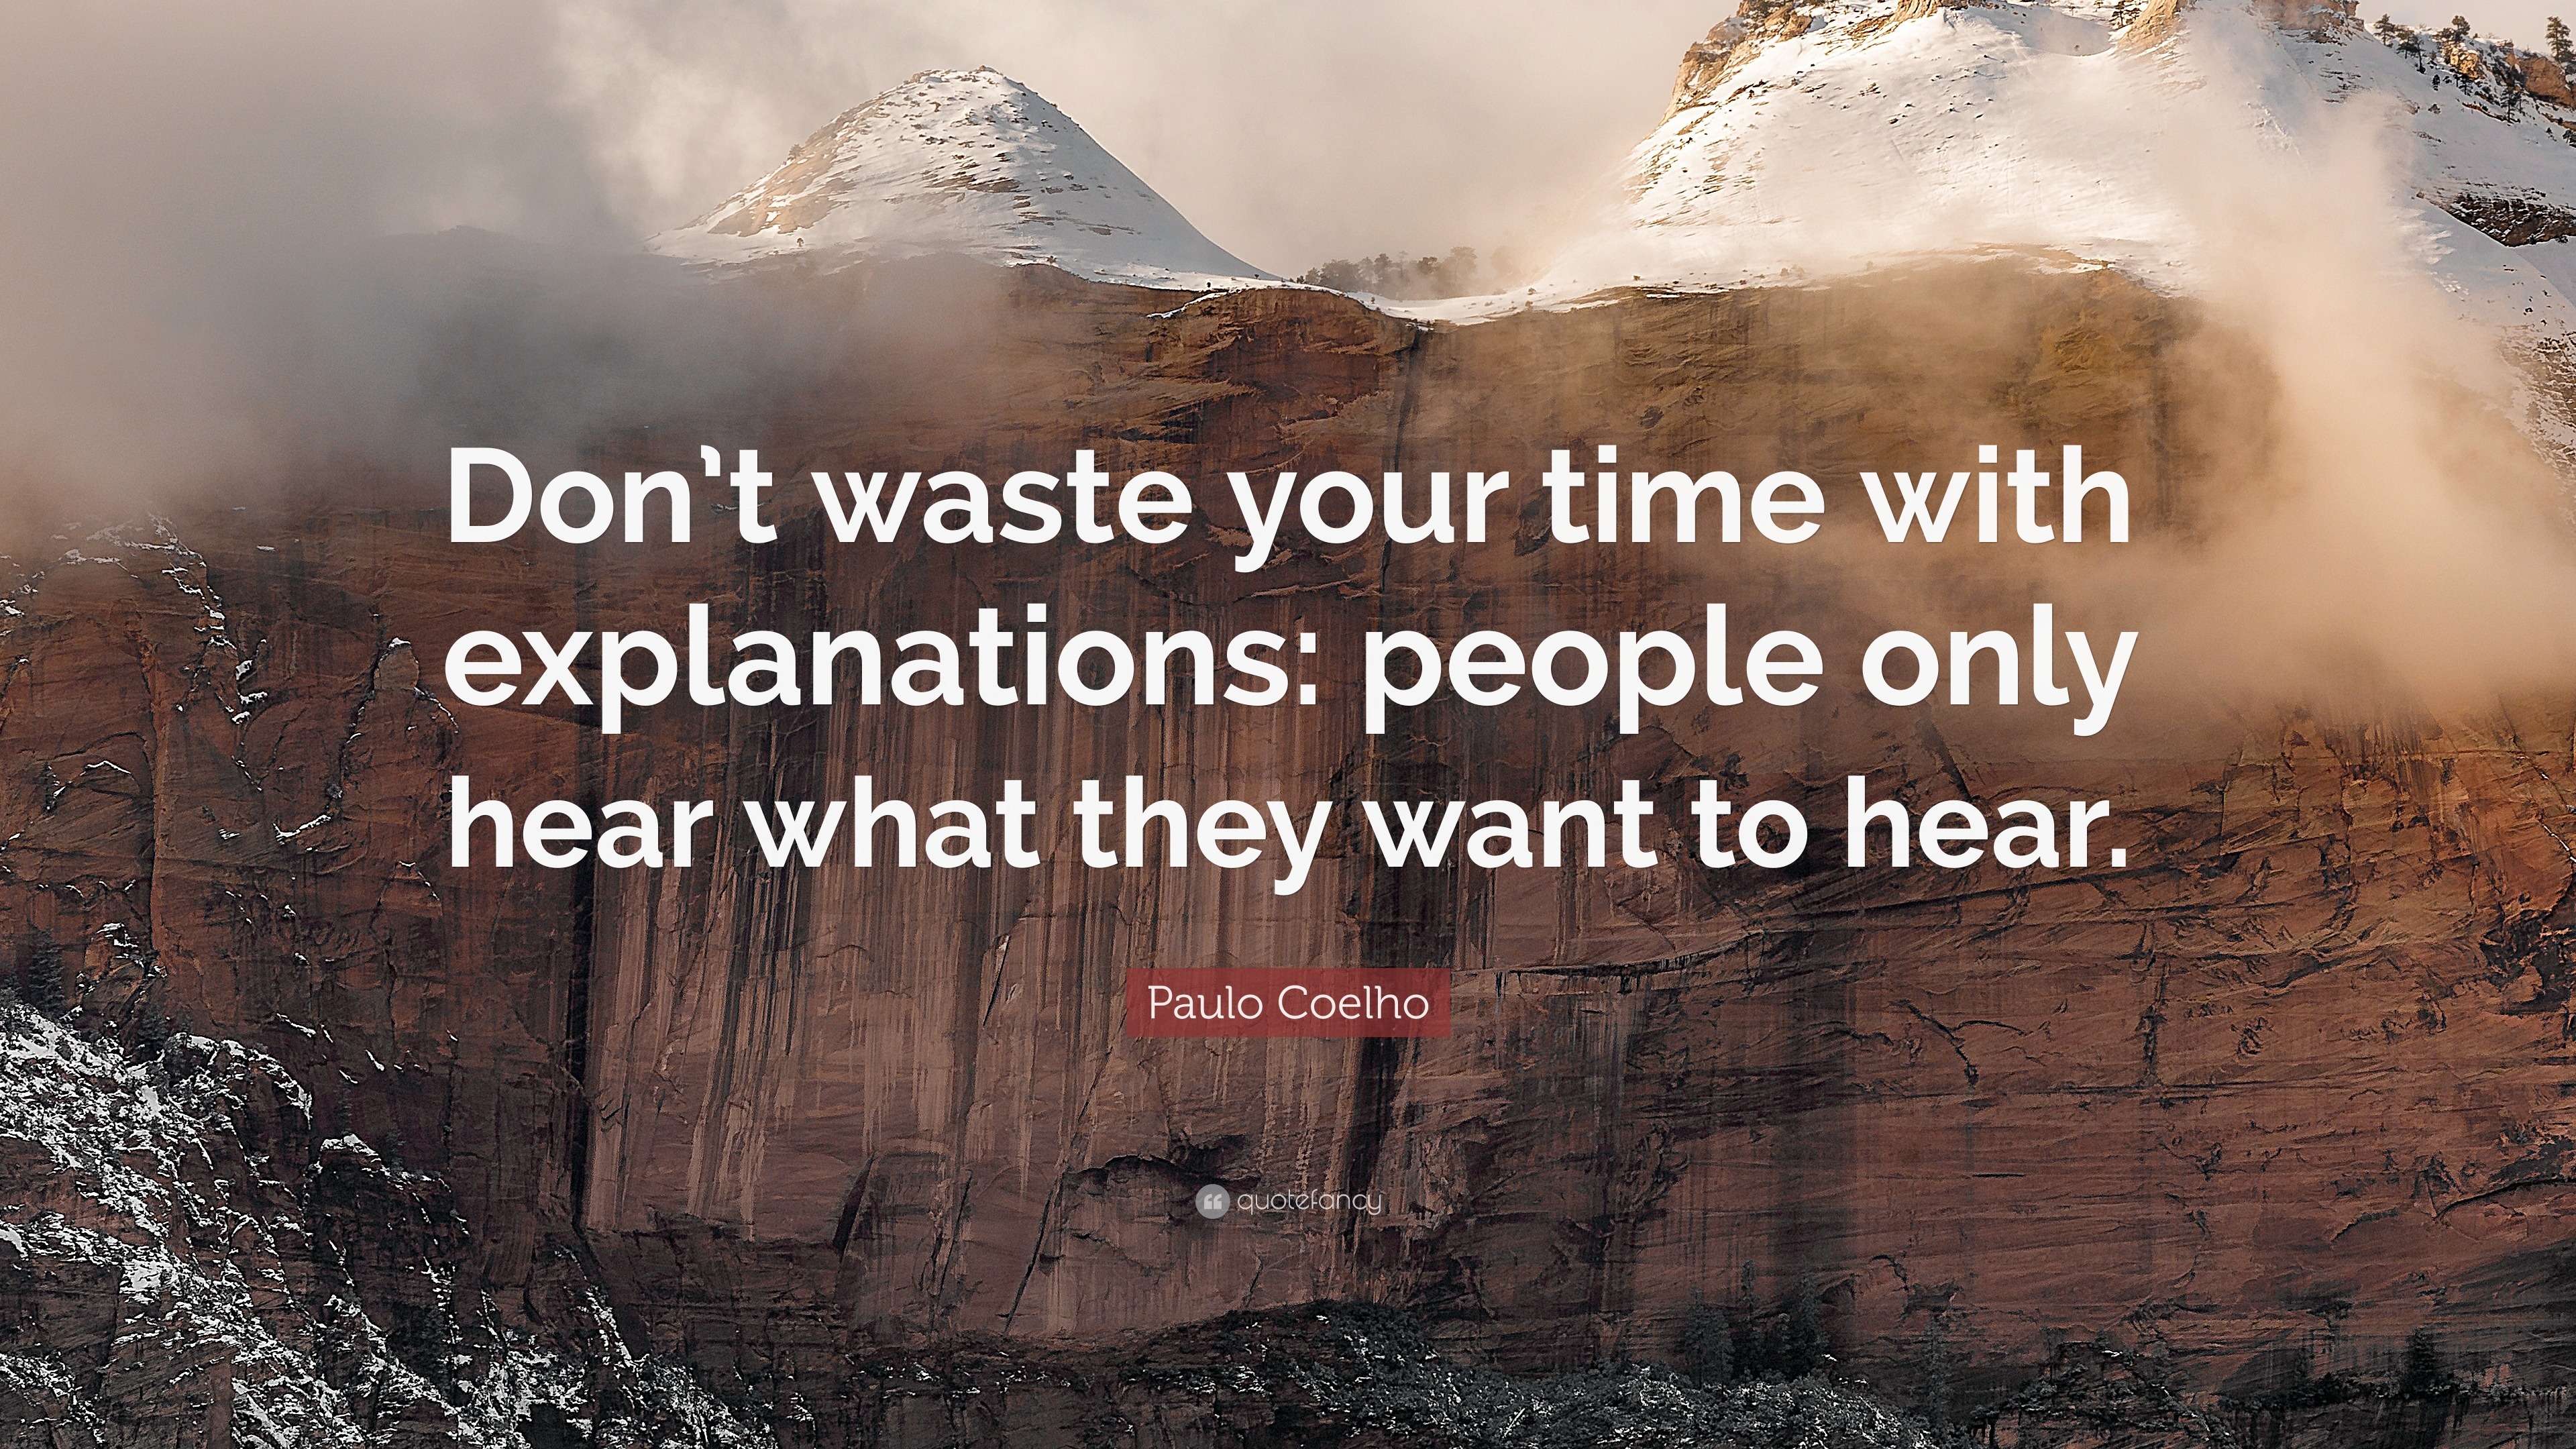 Paulo Coelho Quote “Don t waste your time with explanations people only